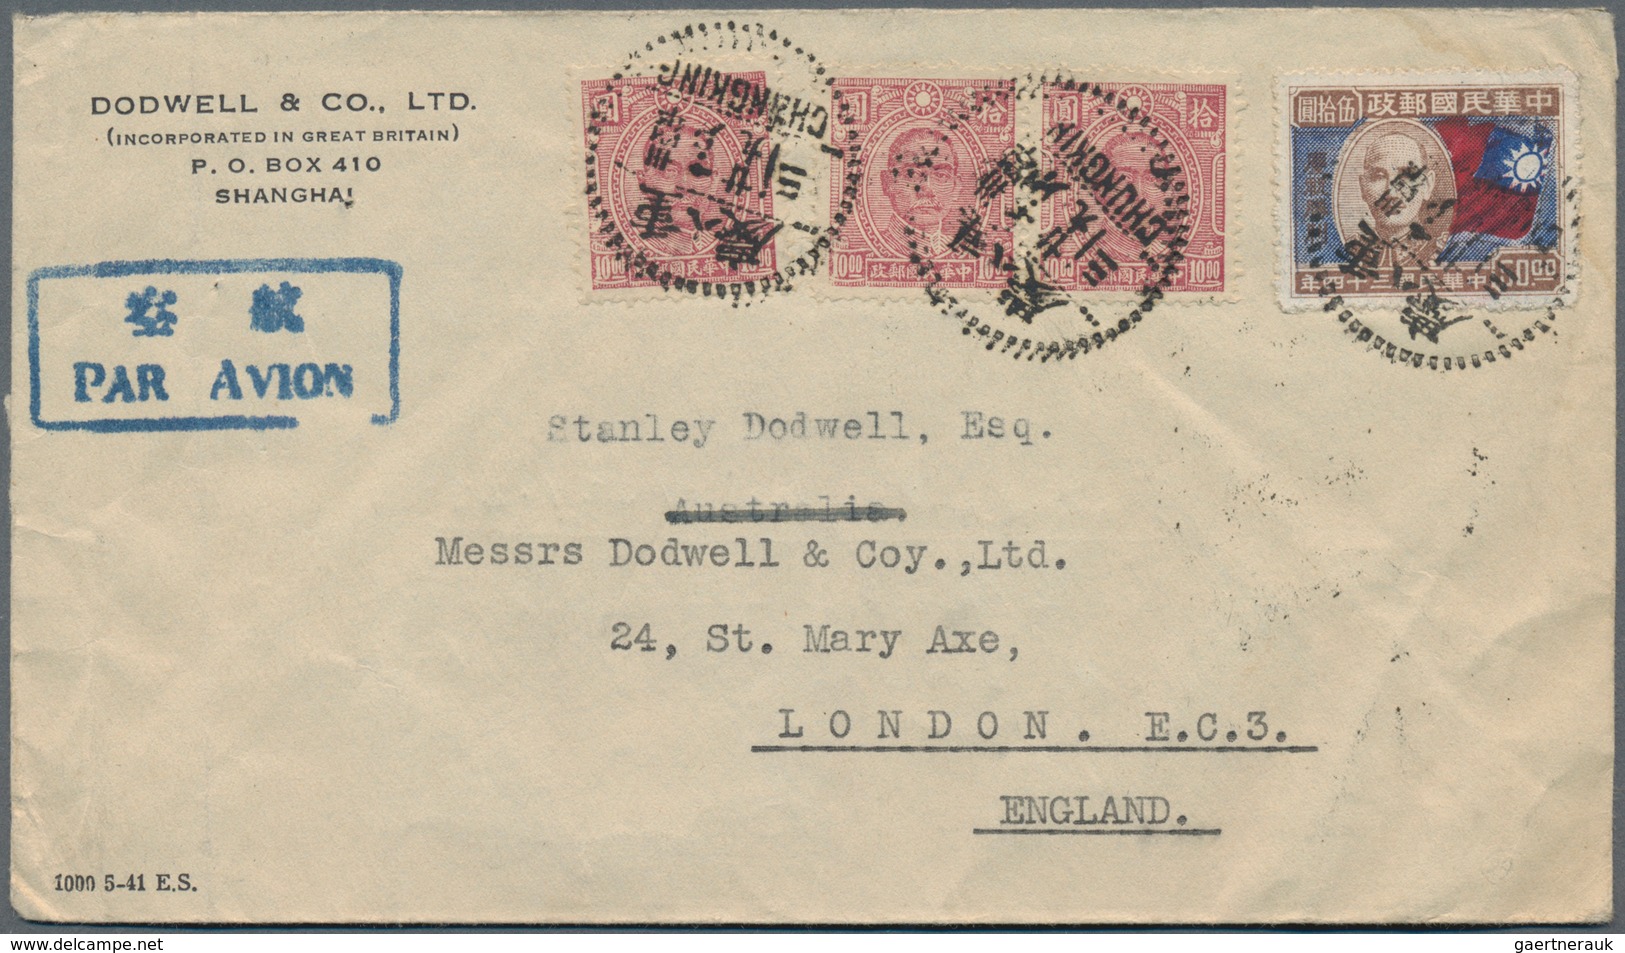 China: 1943/45, air mail covers (4, ex-3 registered) to foreign: $26.80 rate "Chungking 32.7.27" to